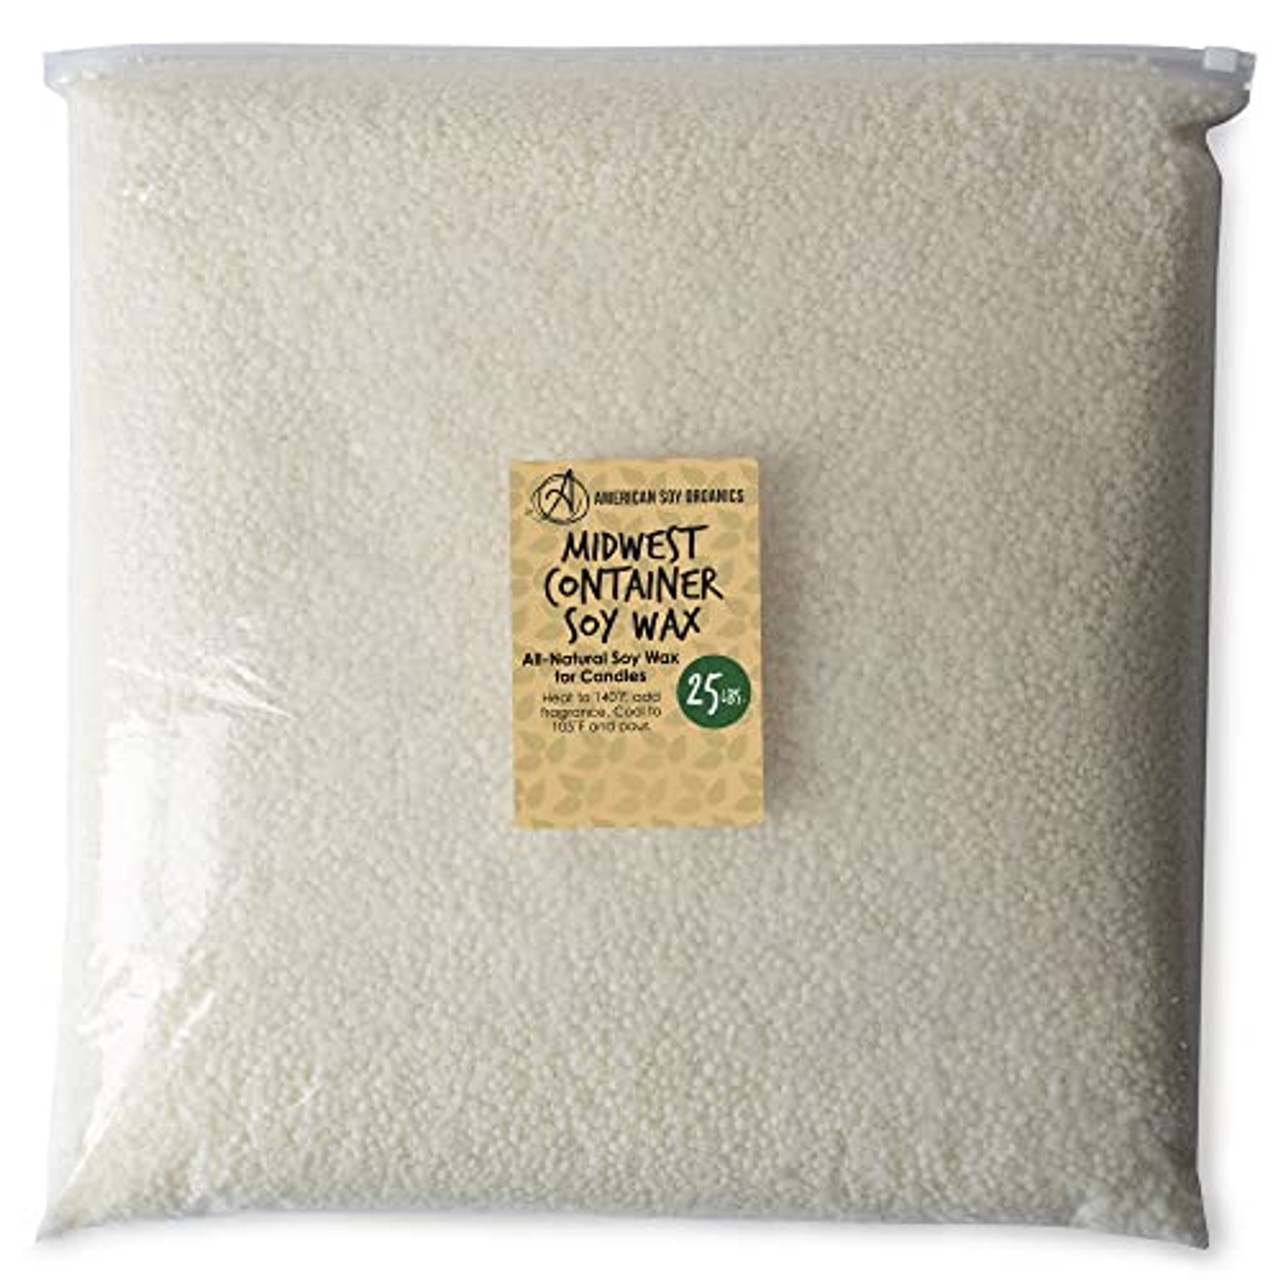  American Soy Organics - 100% Midwest Soy Container Wax Beads  for Candle Making, 45 lb Bag